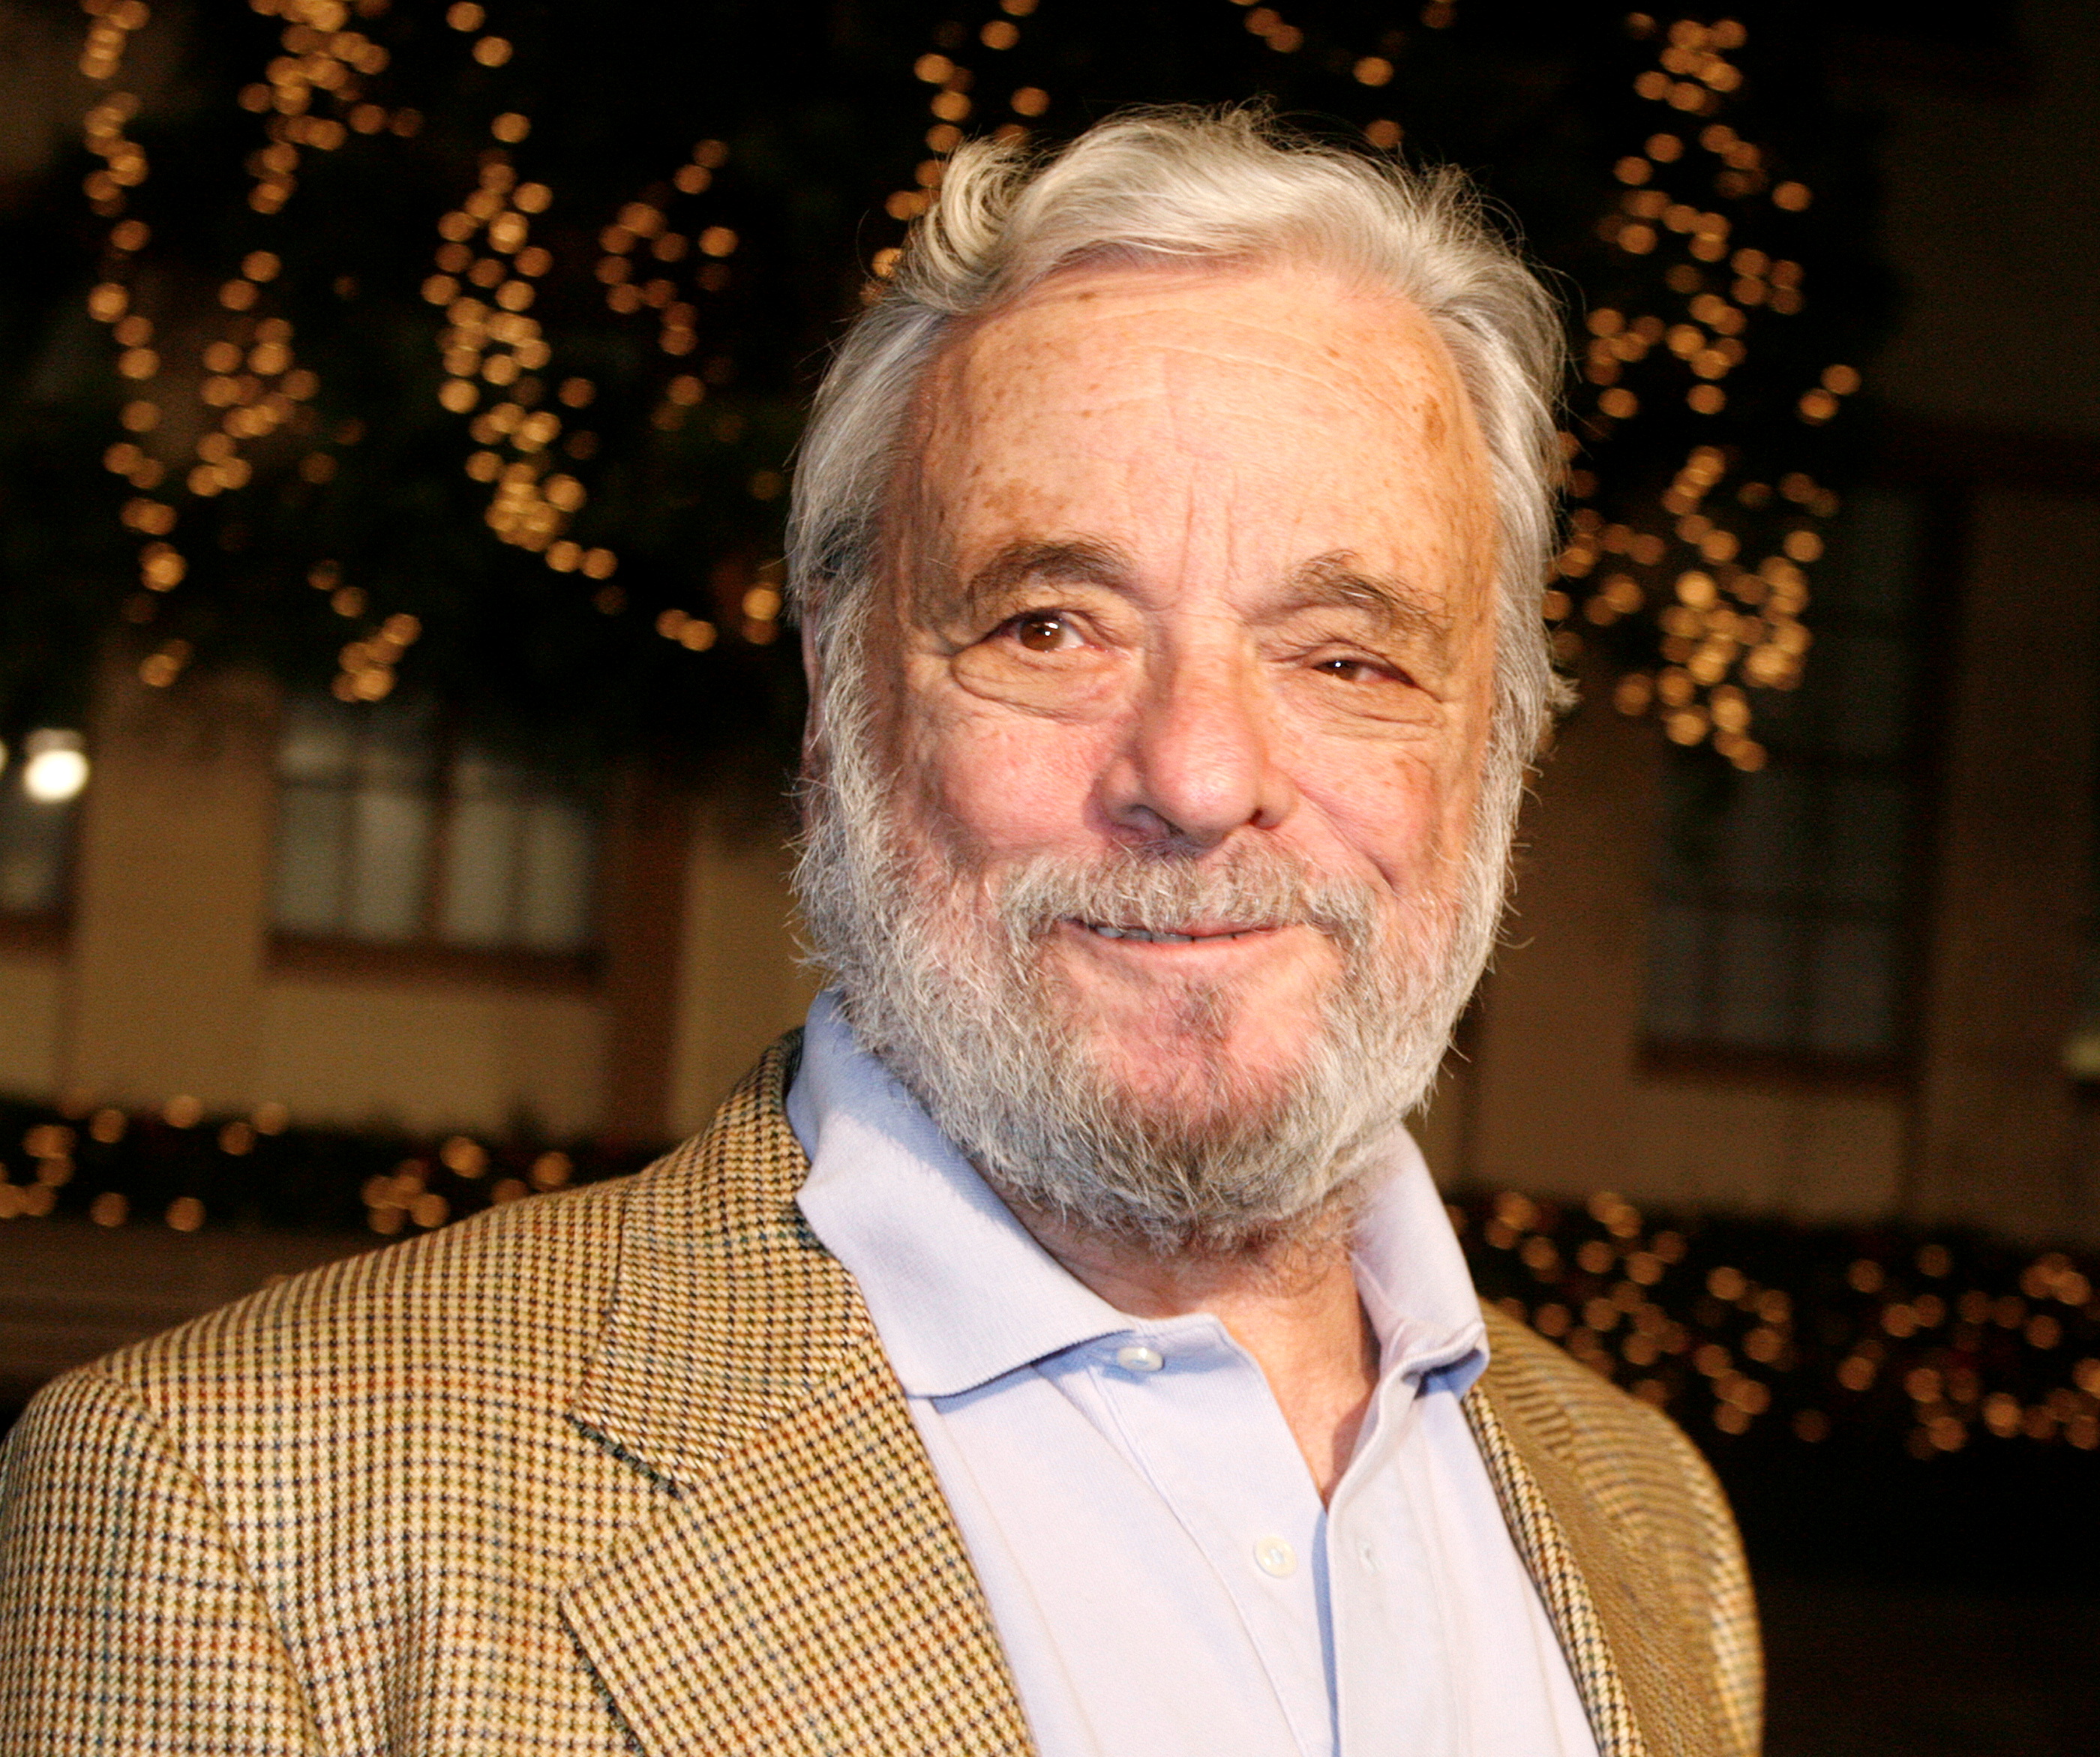 Stephen Sondheim poses as he arrives at a special screening of the DreamWorks Pictures film 